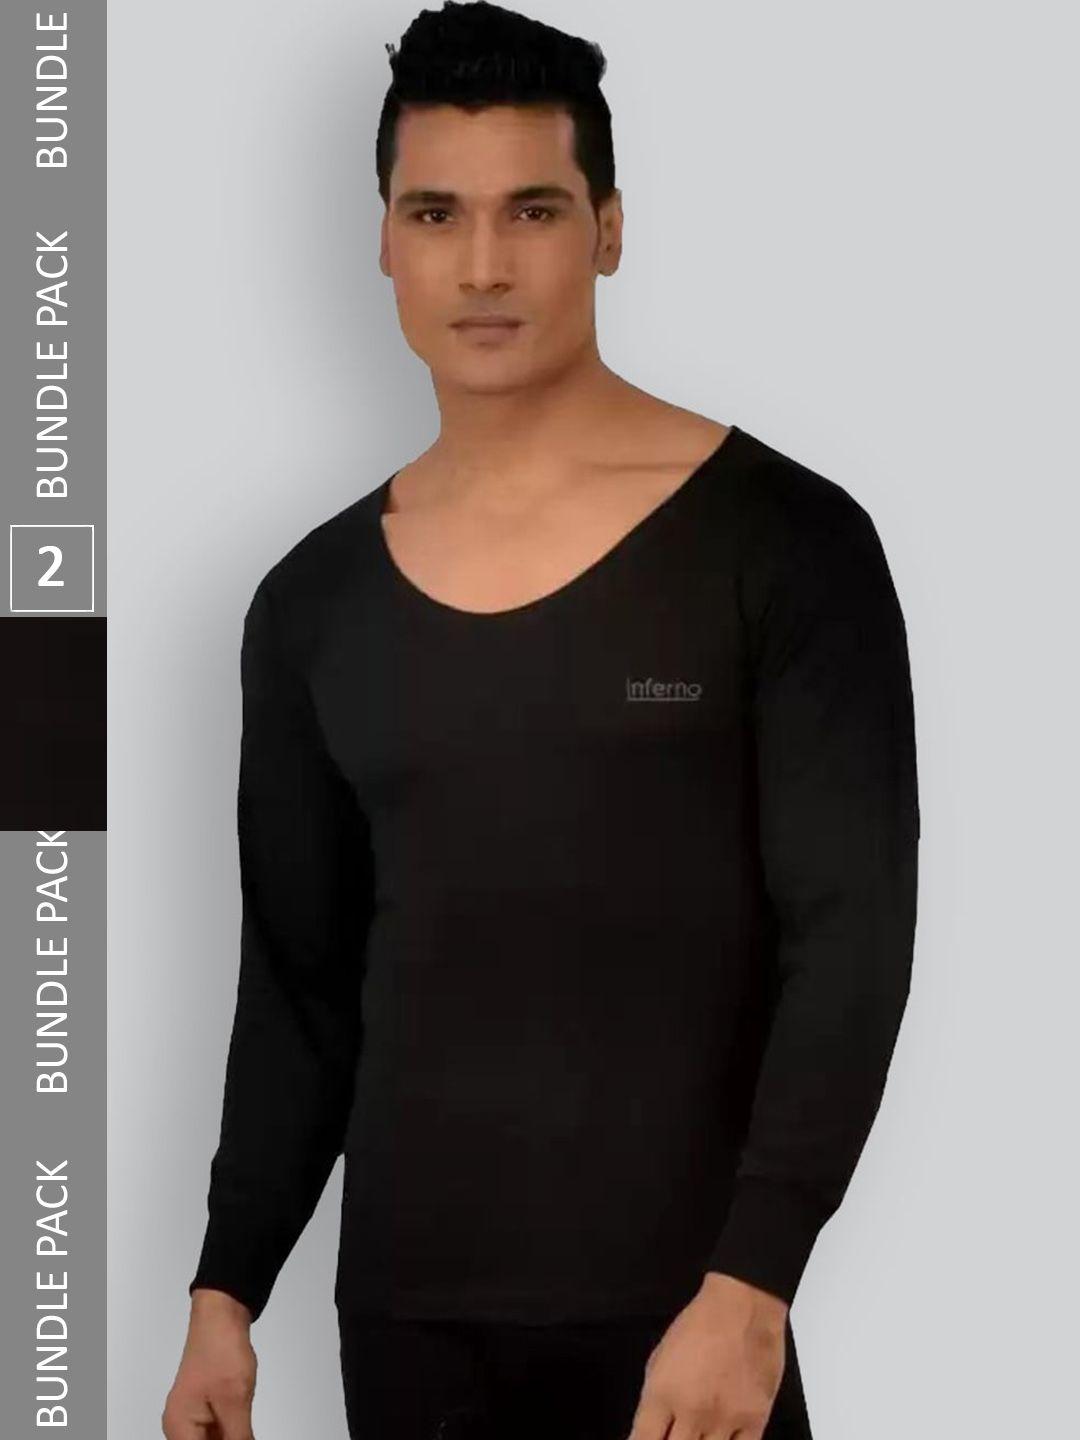 inferno pack of 2 cotton thermal tops